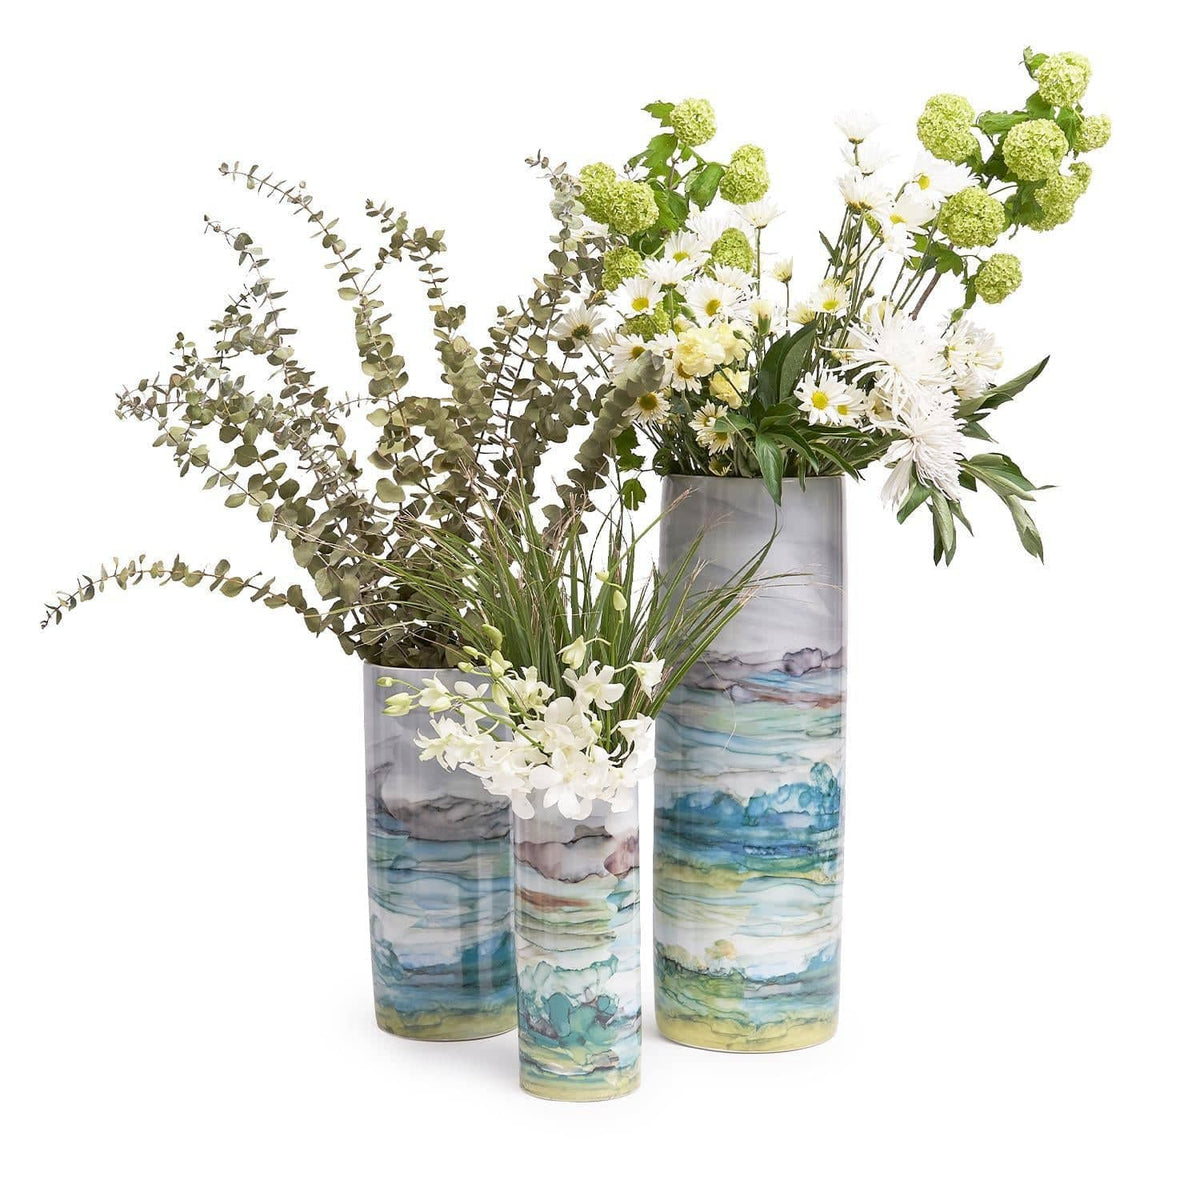 Sea and Landscape Porcelain Cylinder Vase - 3 sizes available - The Preppy Bunny